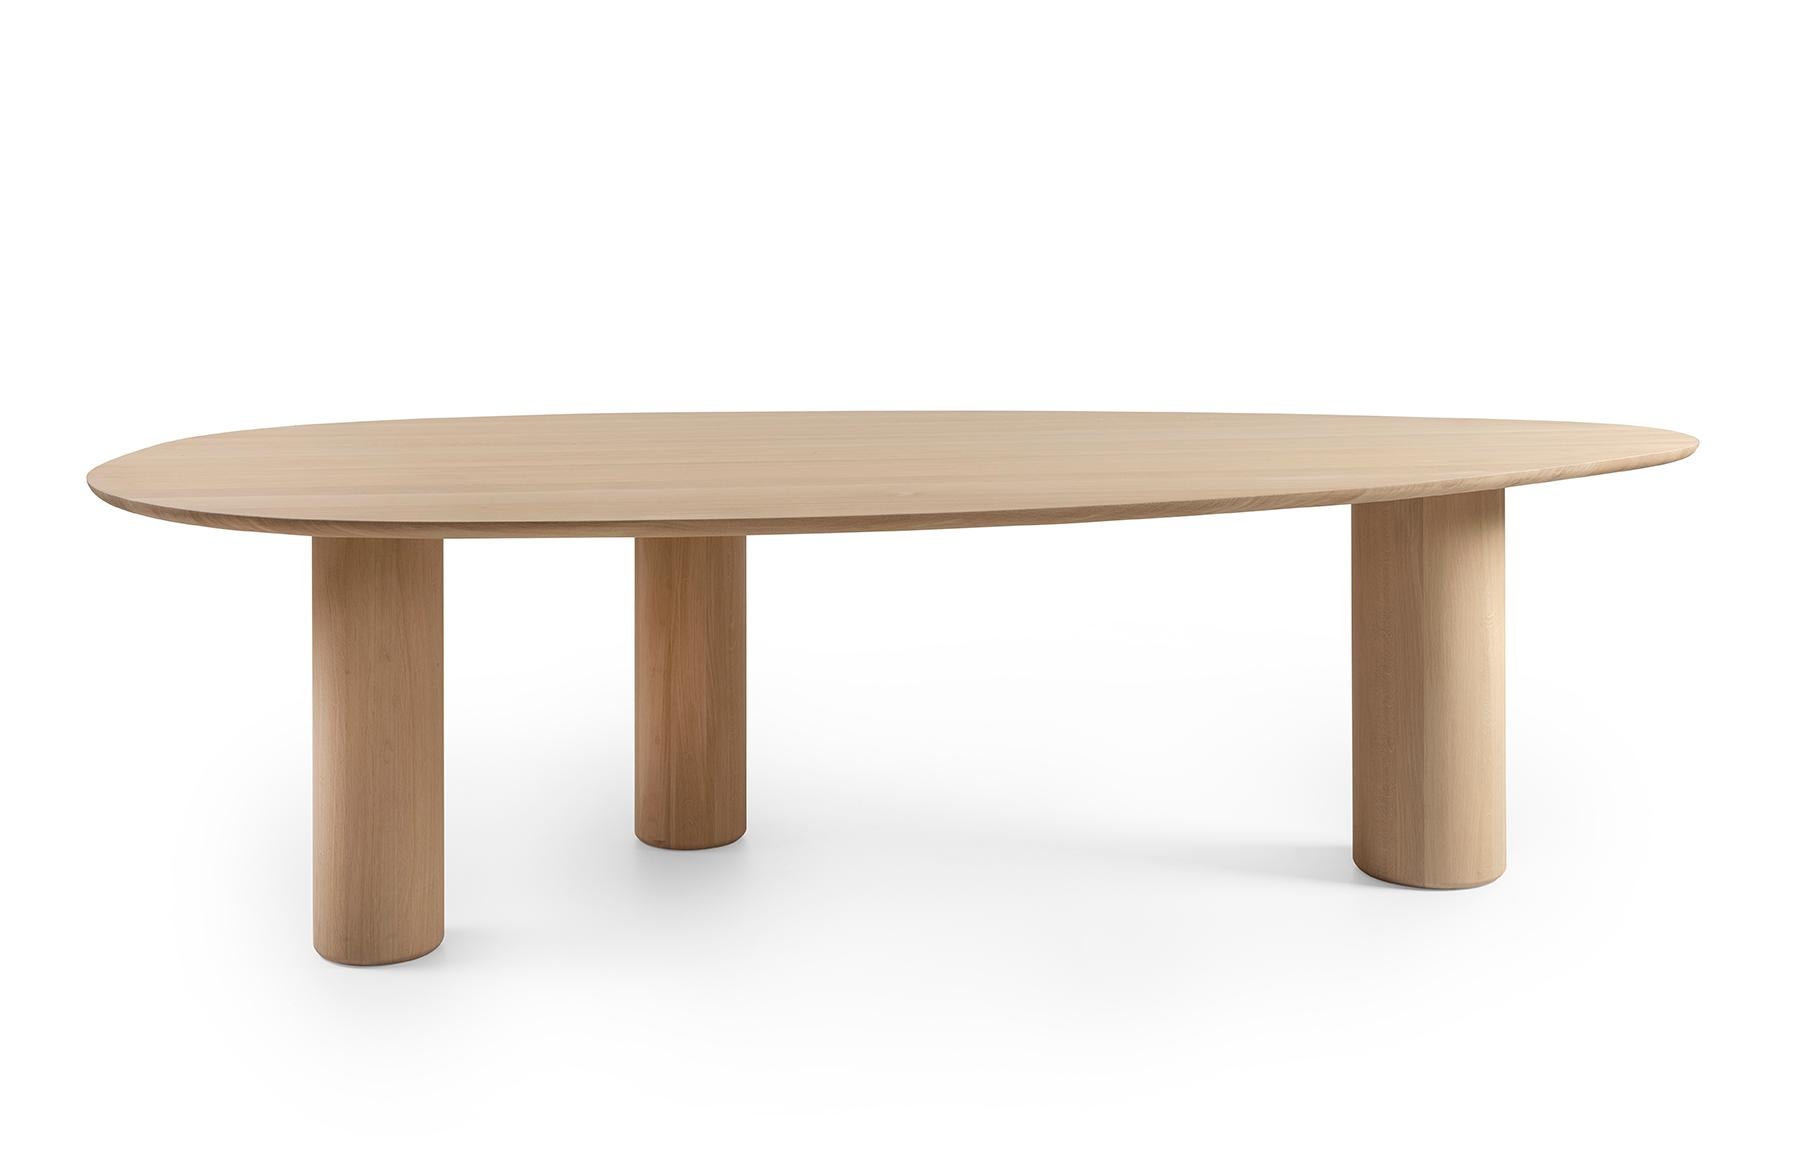 This 100% solid oak table is not round, not oval, not rectangular but very beautifully organic. The top is a bit asymmetrical and finished with a beautiful, soft radius. The edge invites you to grab it, so that you have contact with the solid wood